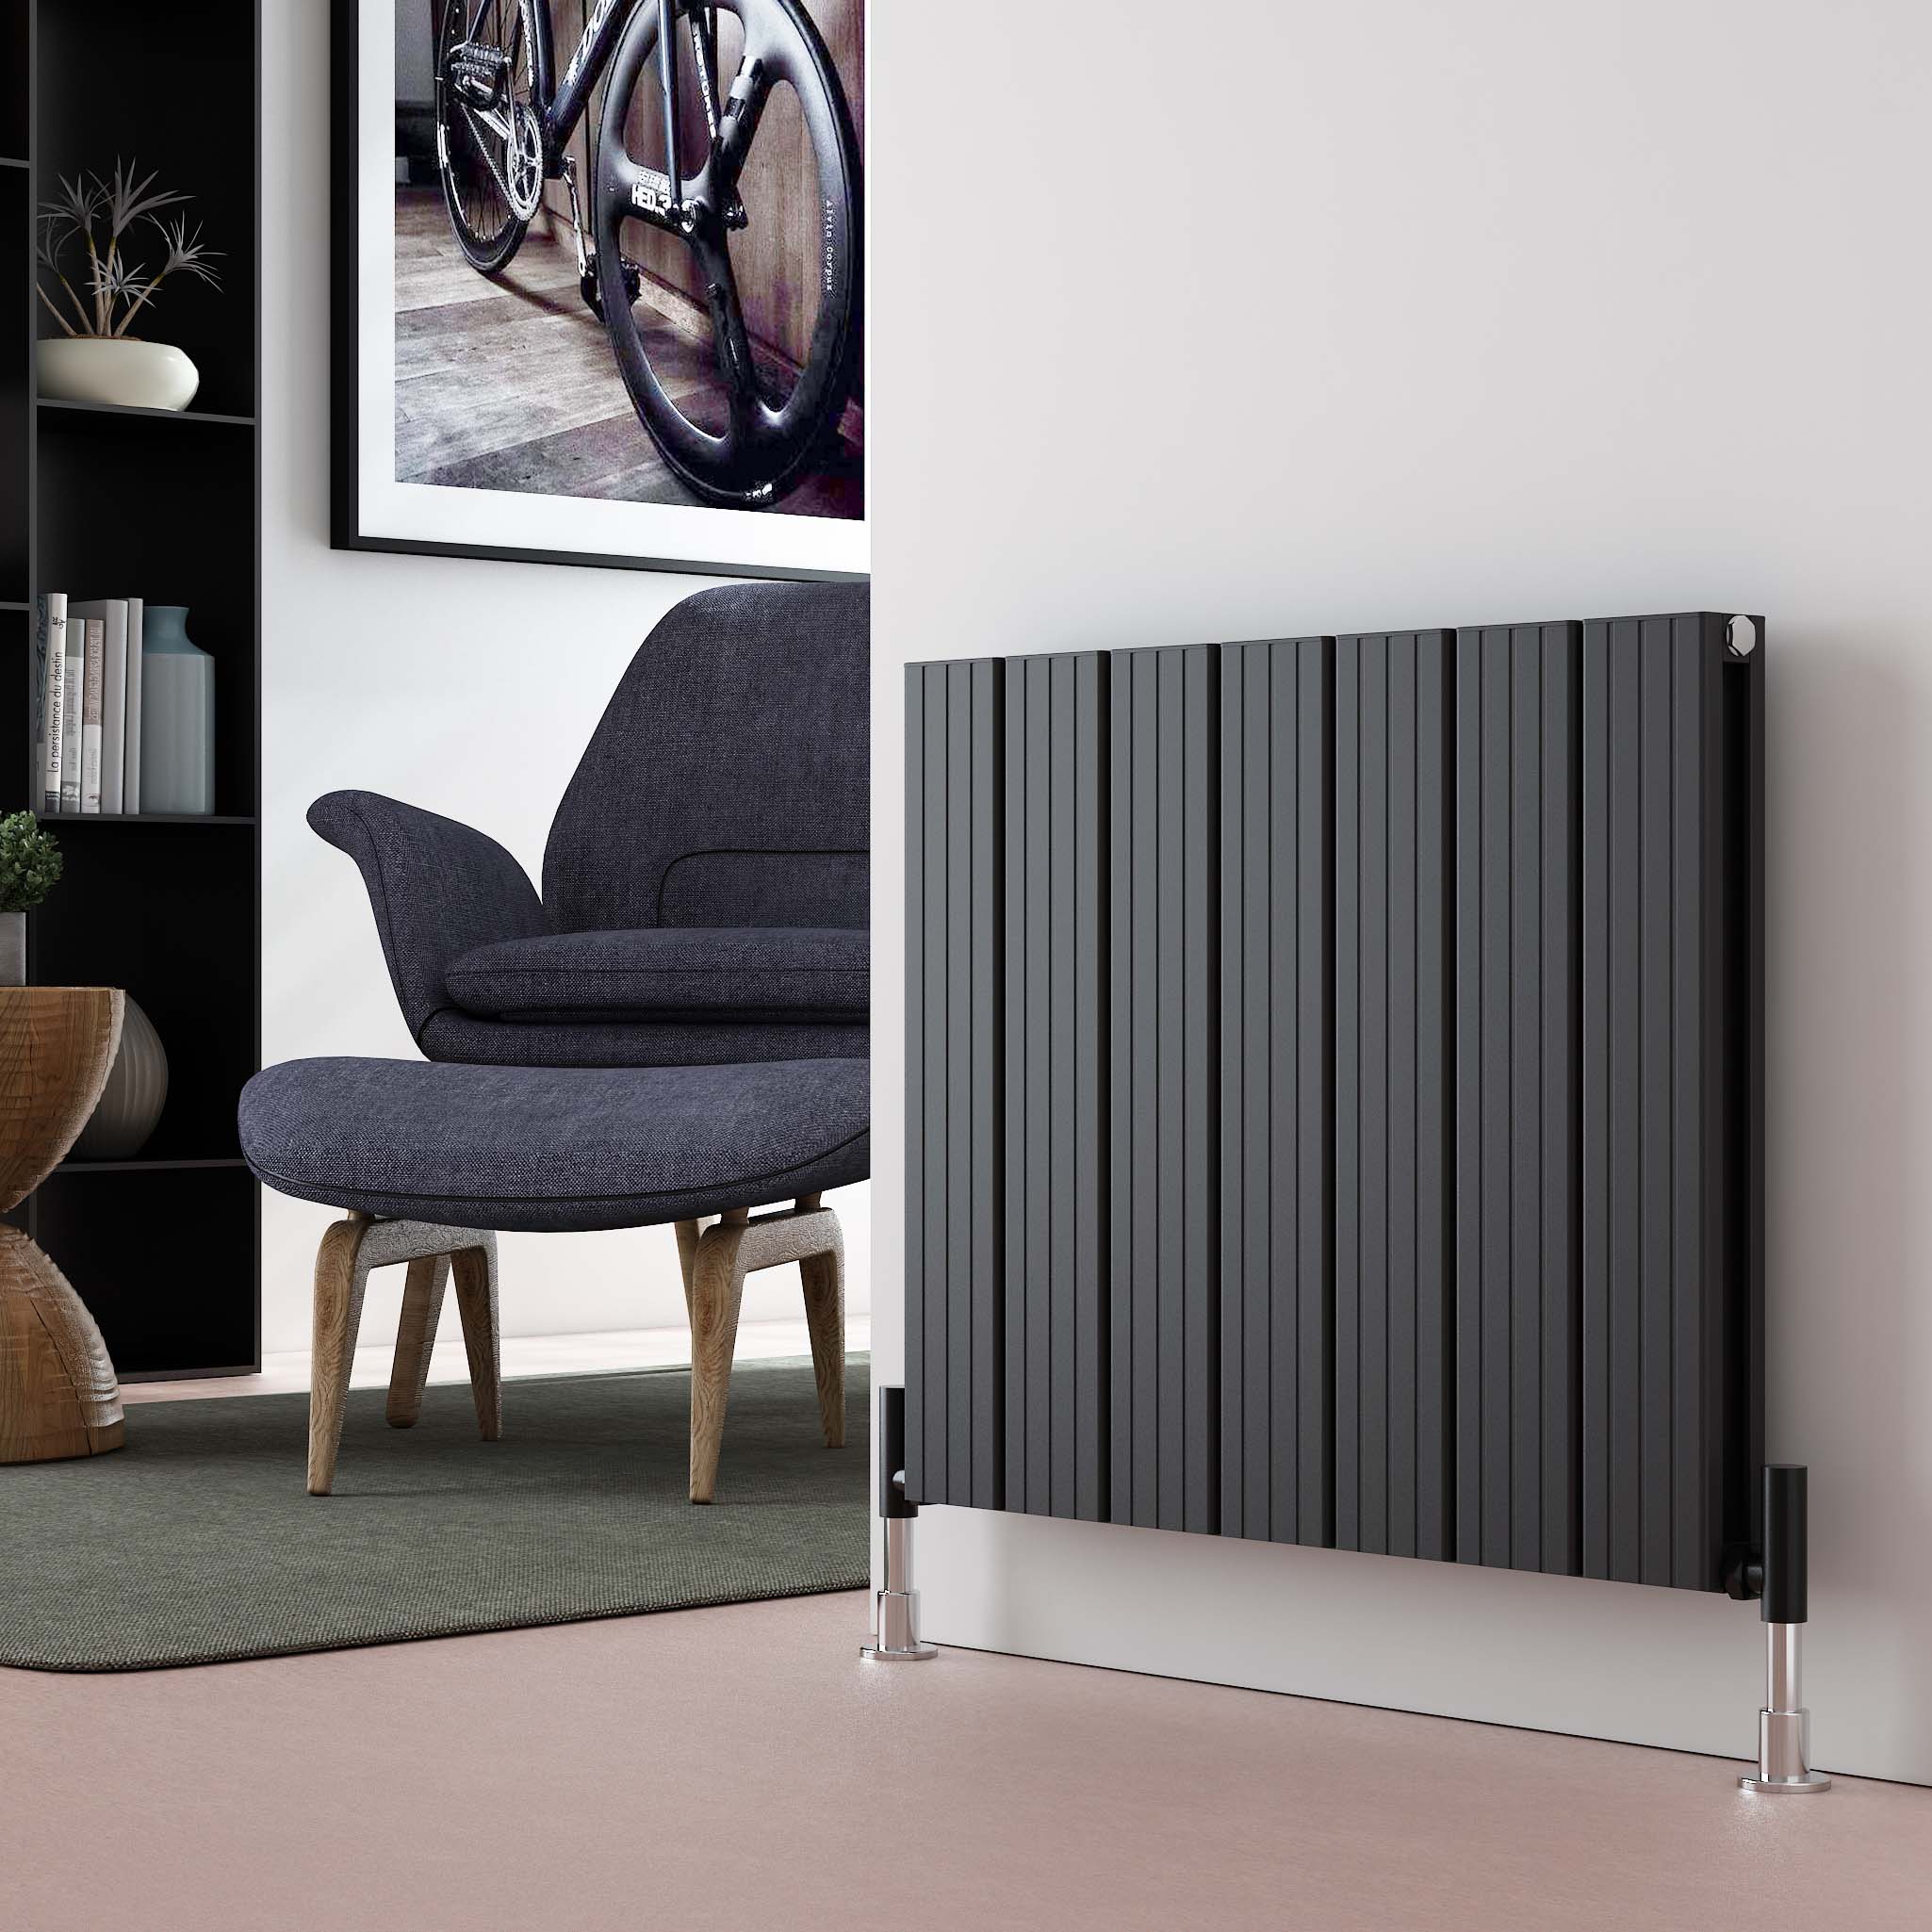 A stylish comparison image showcasing both vertical and horizontal radiators in a designer setting illustrating the different aesthetic appeals and space efficiencies of each style in a modern home environment